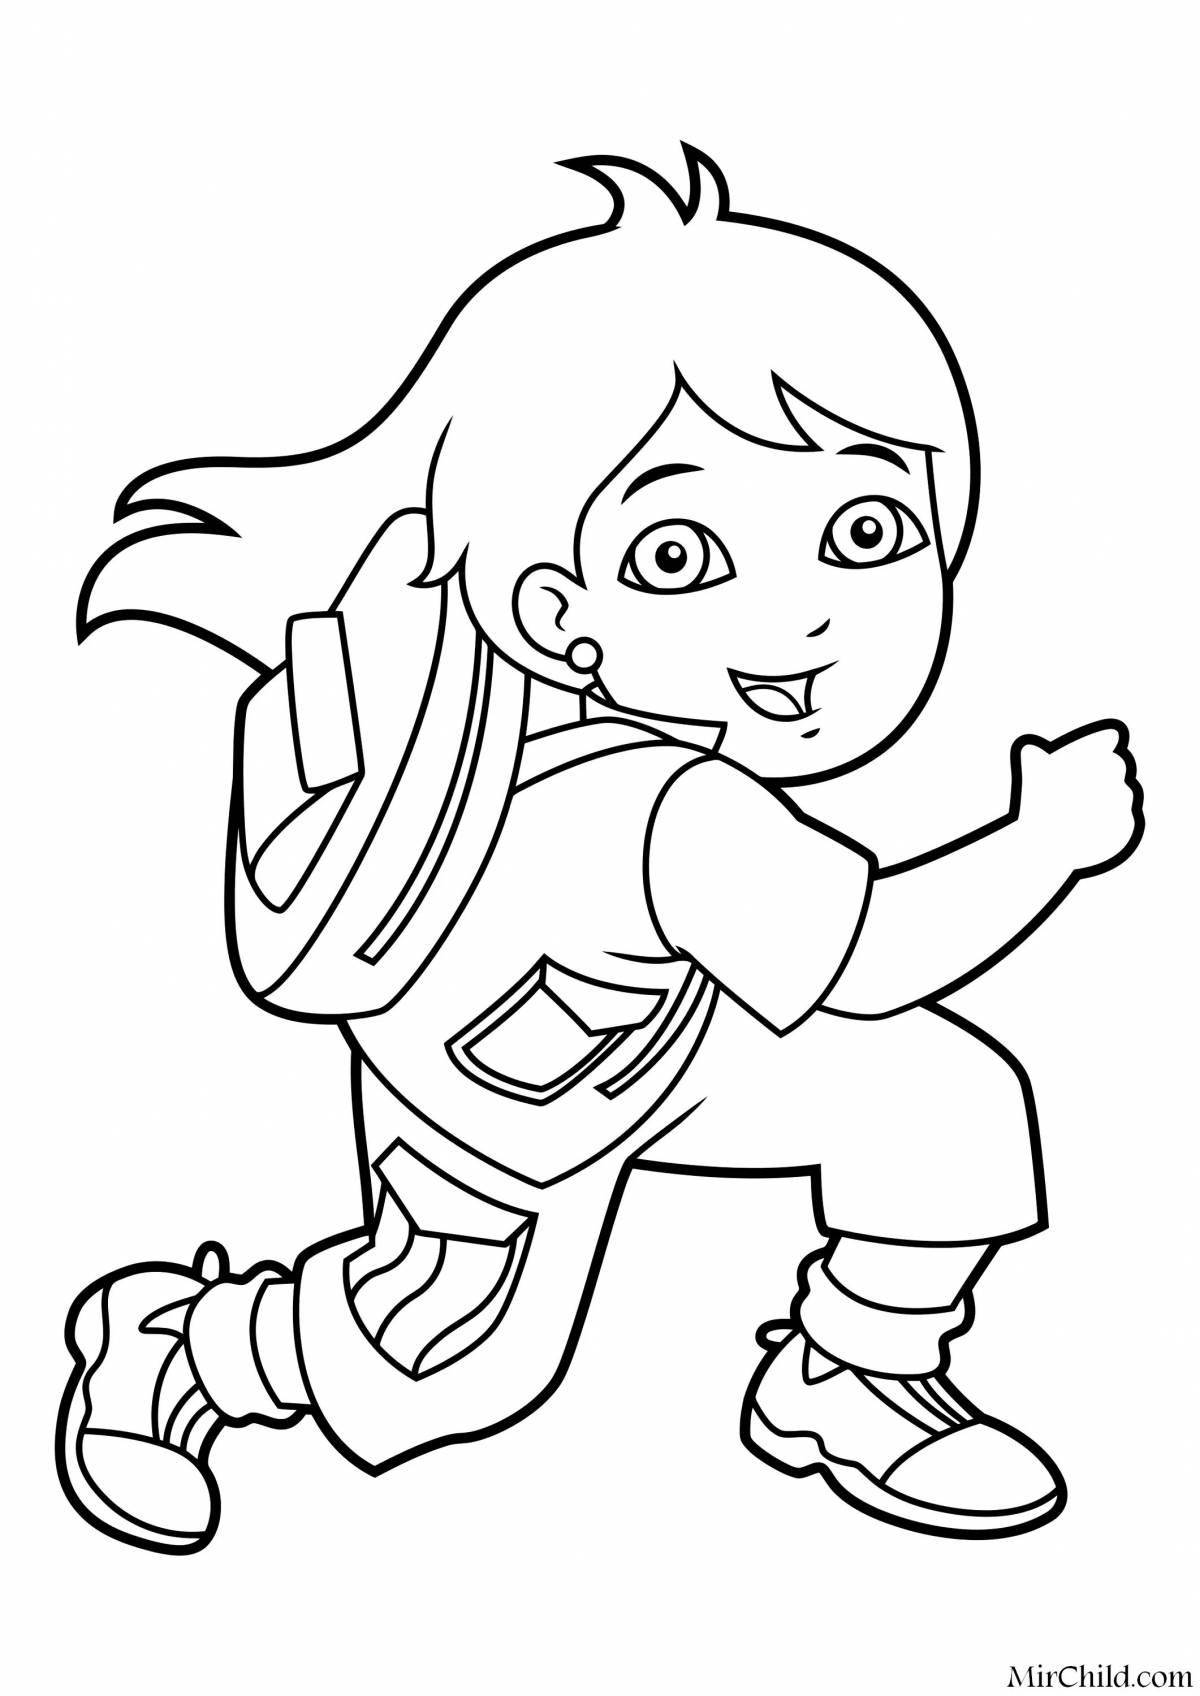 Coloring page energetic run